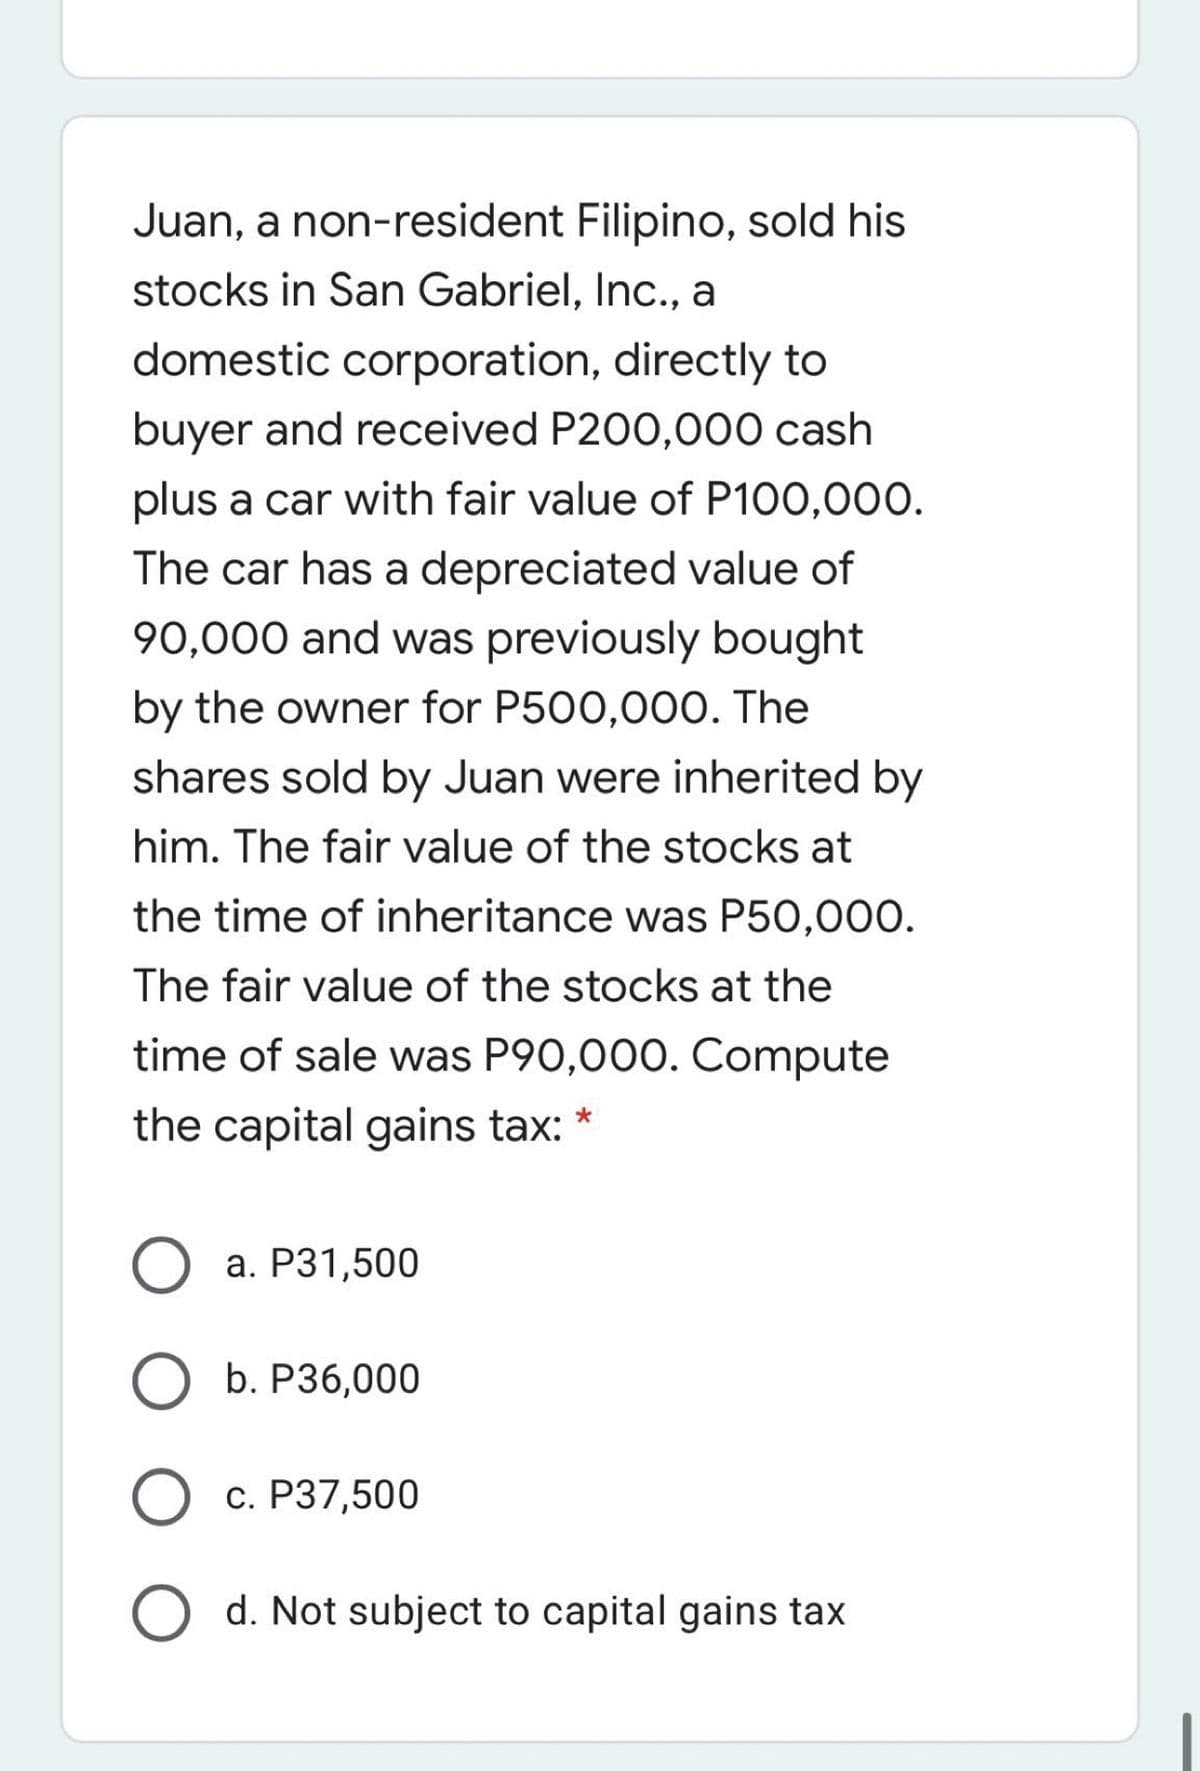 Juan, a non-resident Filipino, sold his
stocks in San Gabriel, Inc., a
domestic corporation, directly to
buyer and received P200,000 cash
plus a car with fair value of P100,000.
The car has a depreciated value of
90,000 and was previously bought
by the owner for P500,000. The
shares sold by Juan were inherited by
him. The fair value of the stocks at
the time of inheritance was P50,000.
The fair value of the stocks at the
time of sale was P90,000. Compute
the capital gains tax: *
а. Р31,500
b. P36,000
с. Р37,500
d. Not subject to capital gains tax
